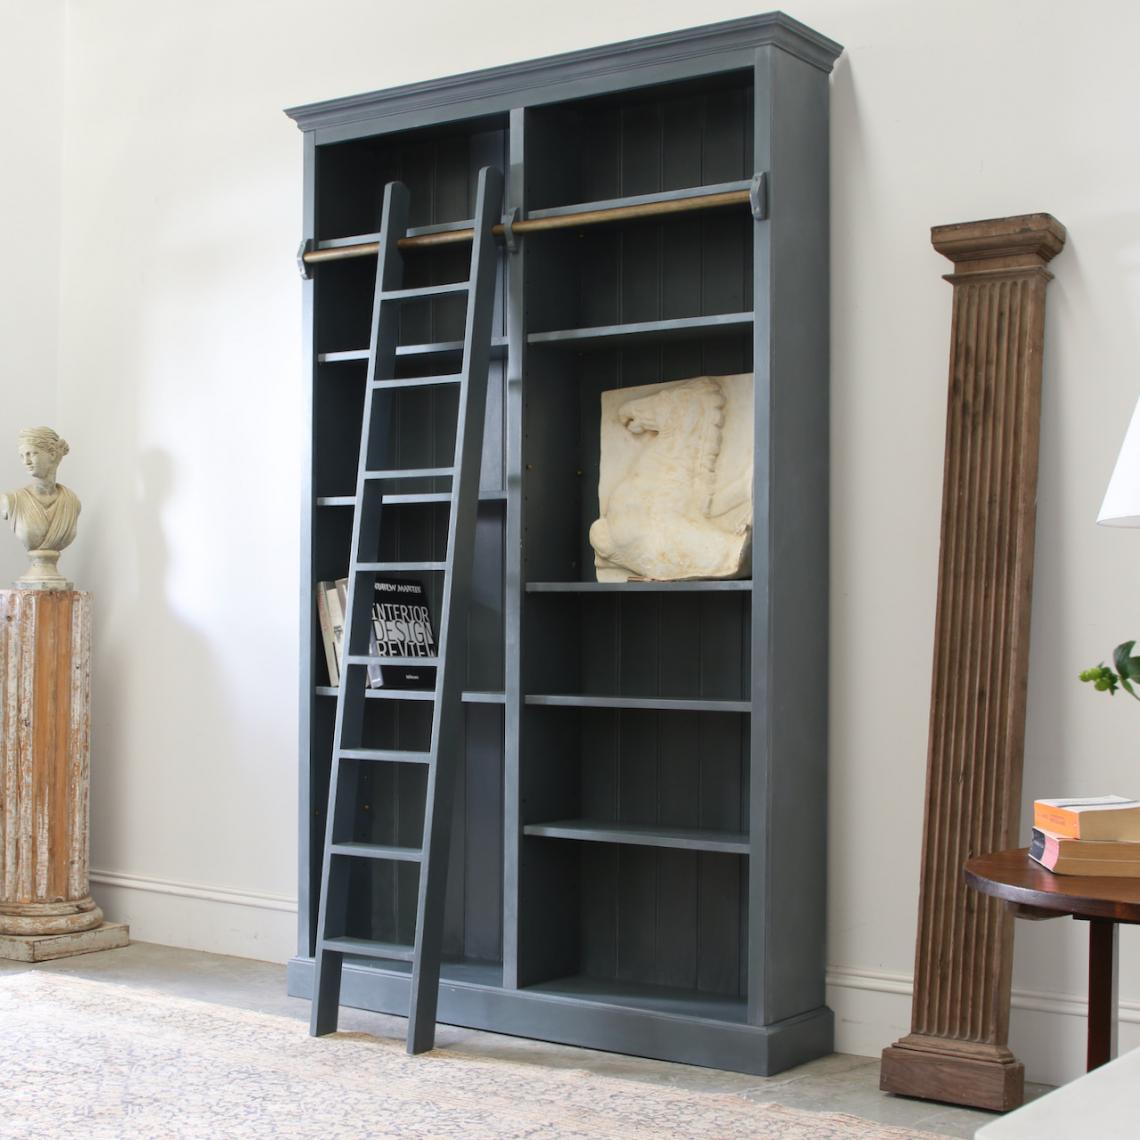 JS Editions Bookcase